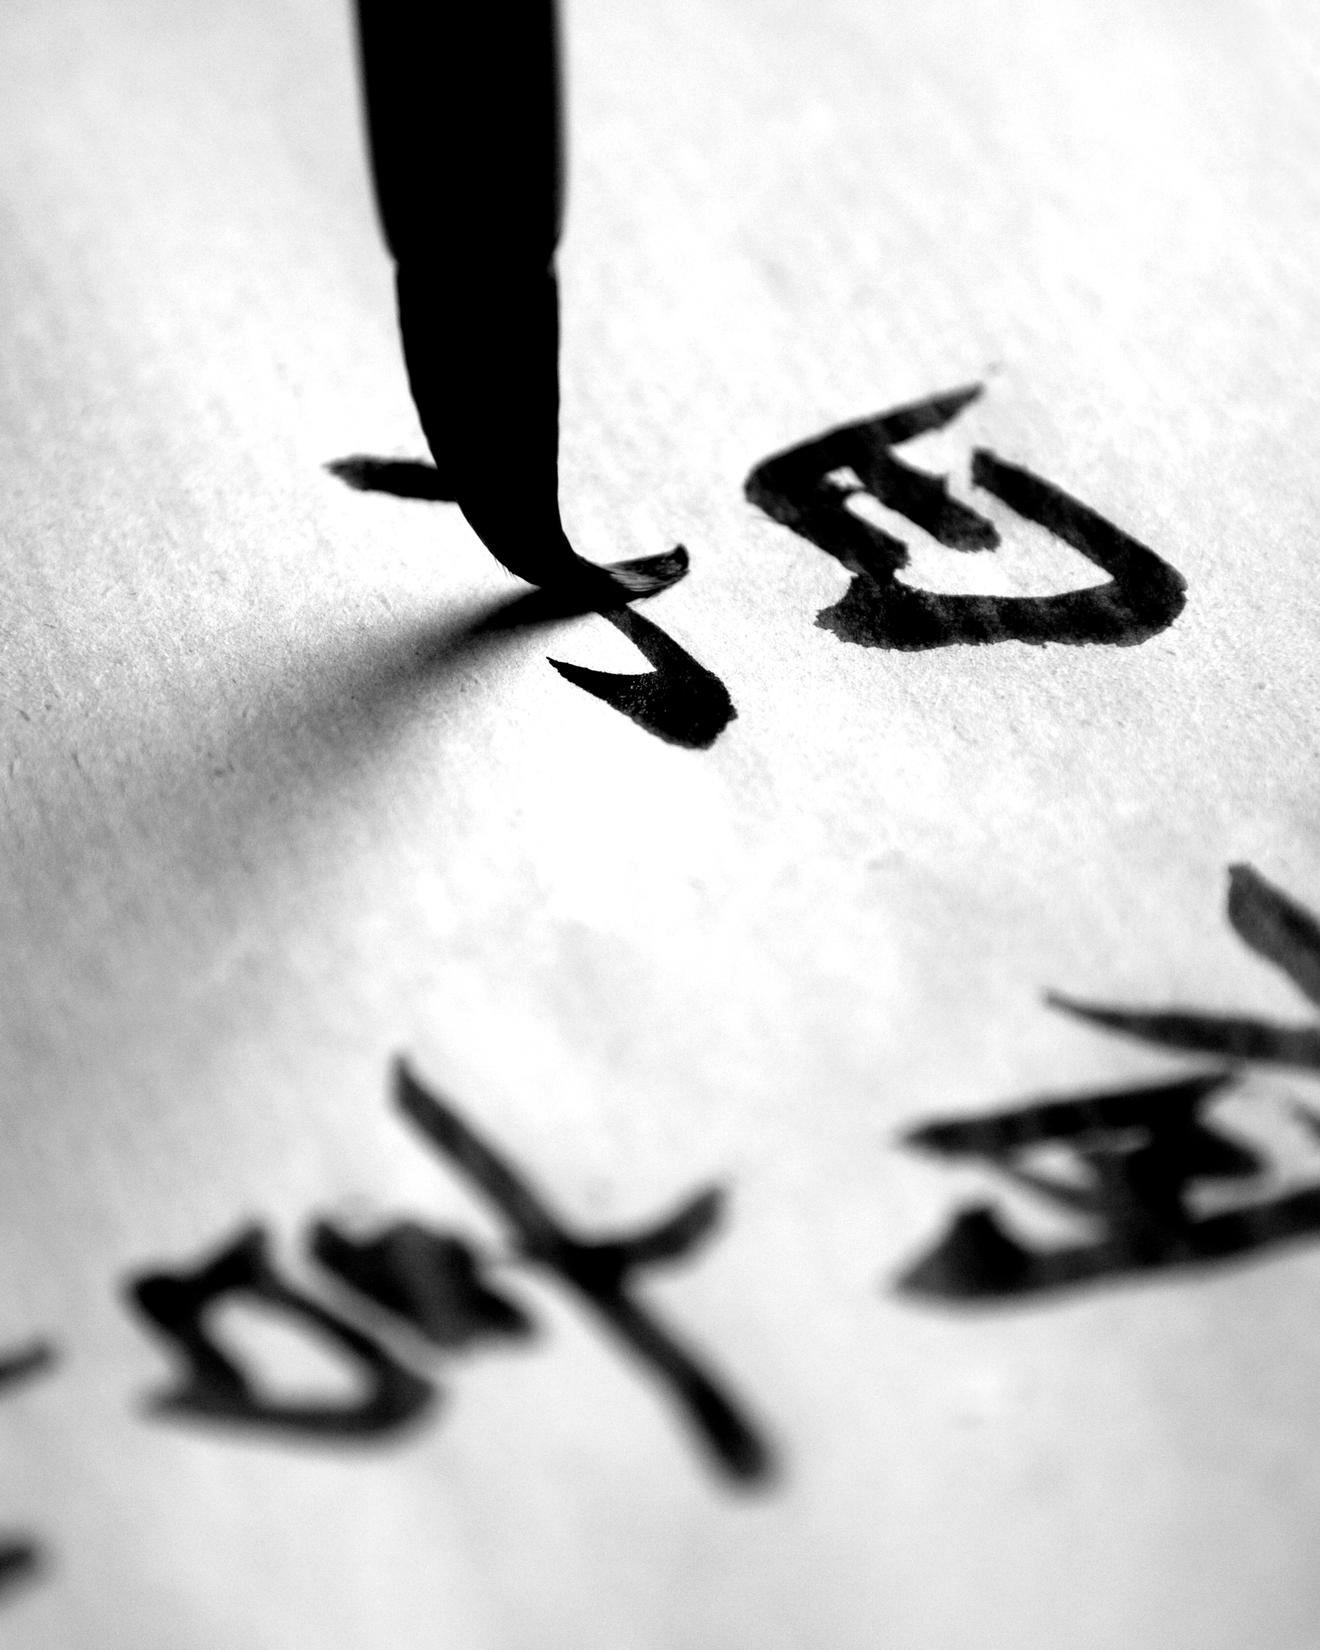 Close up image of Chinese calligraphy characters and quill